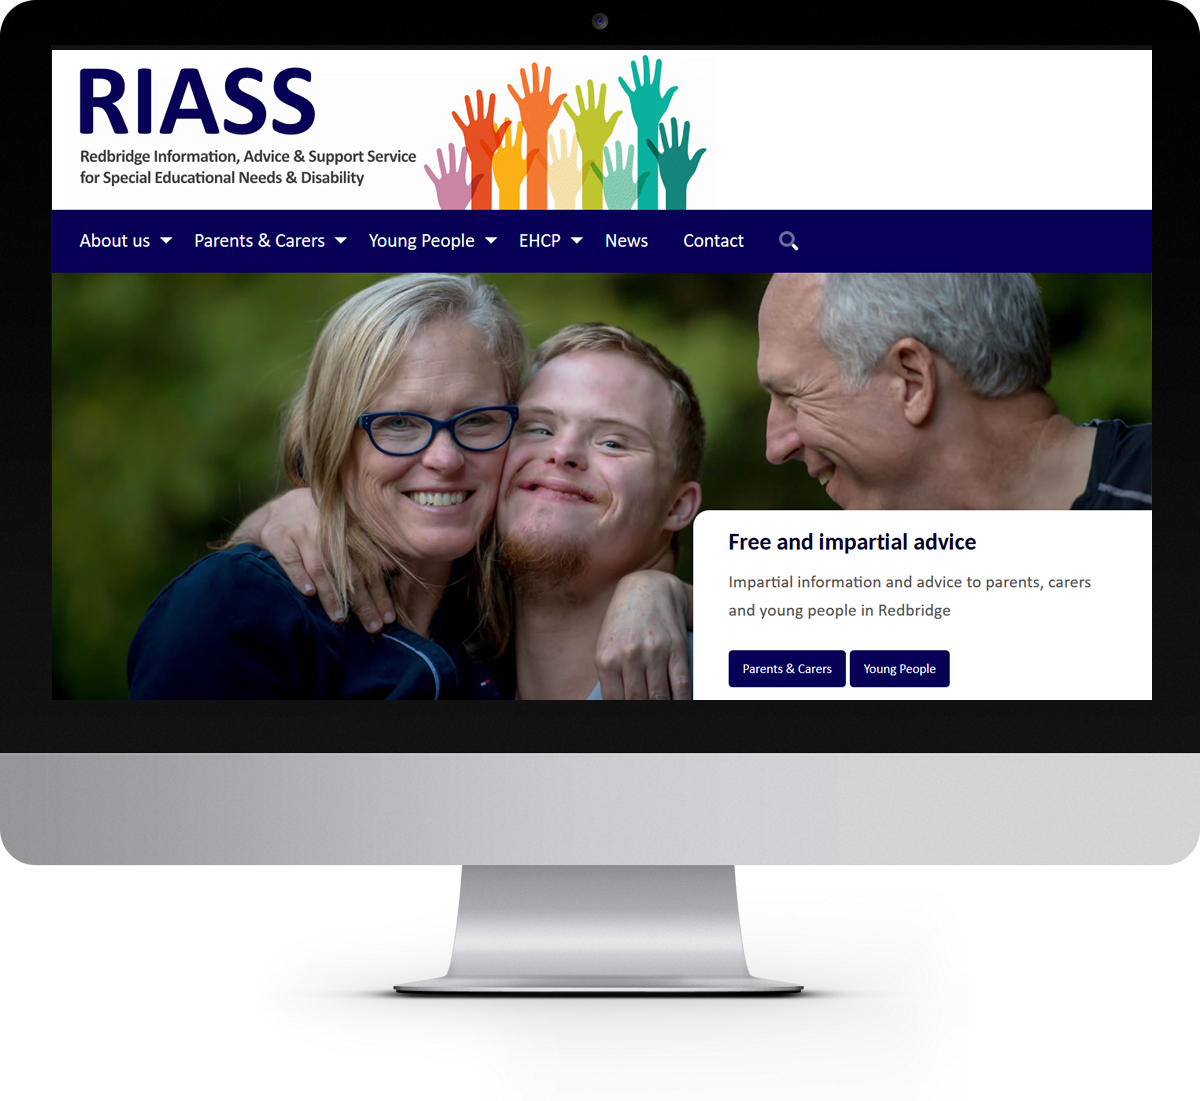 The RIASS website home page